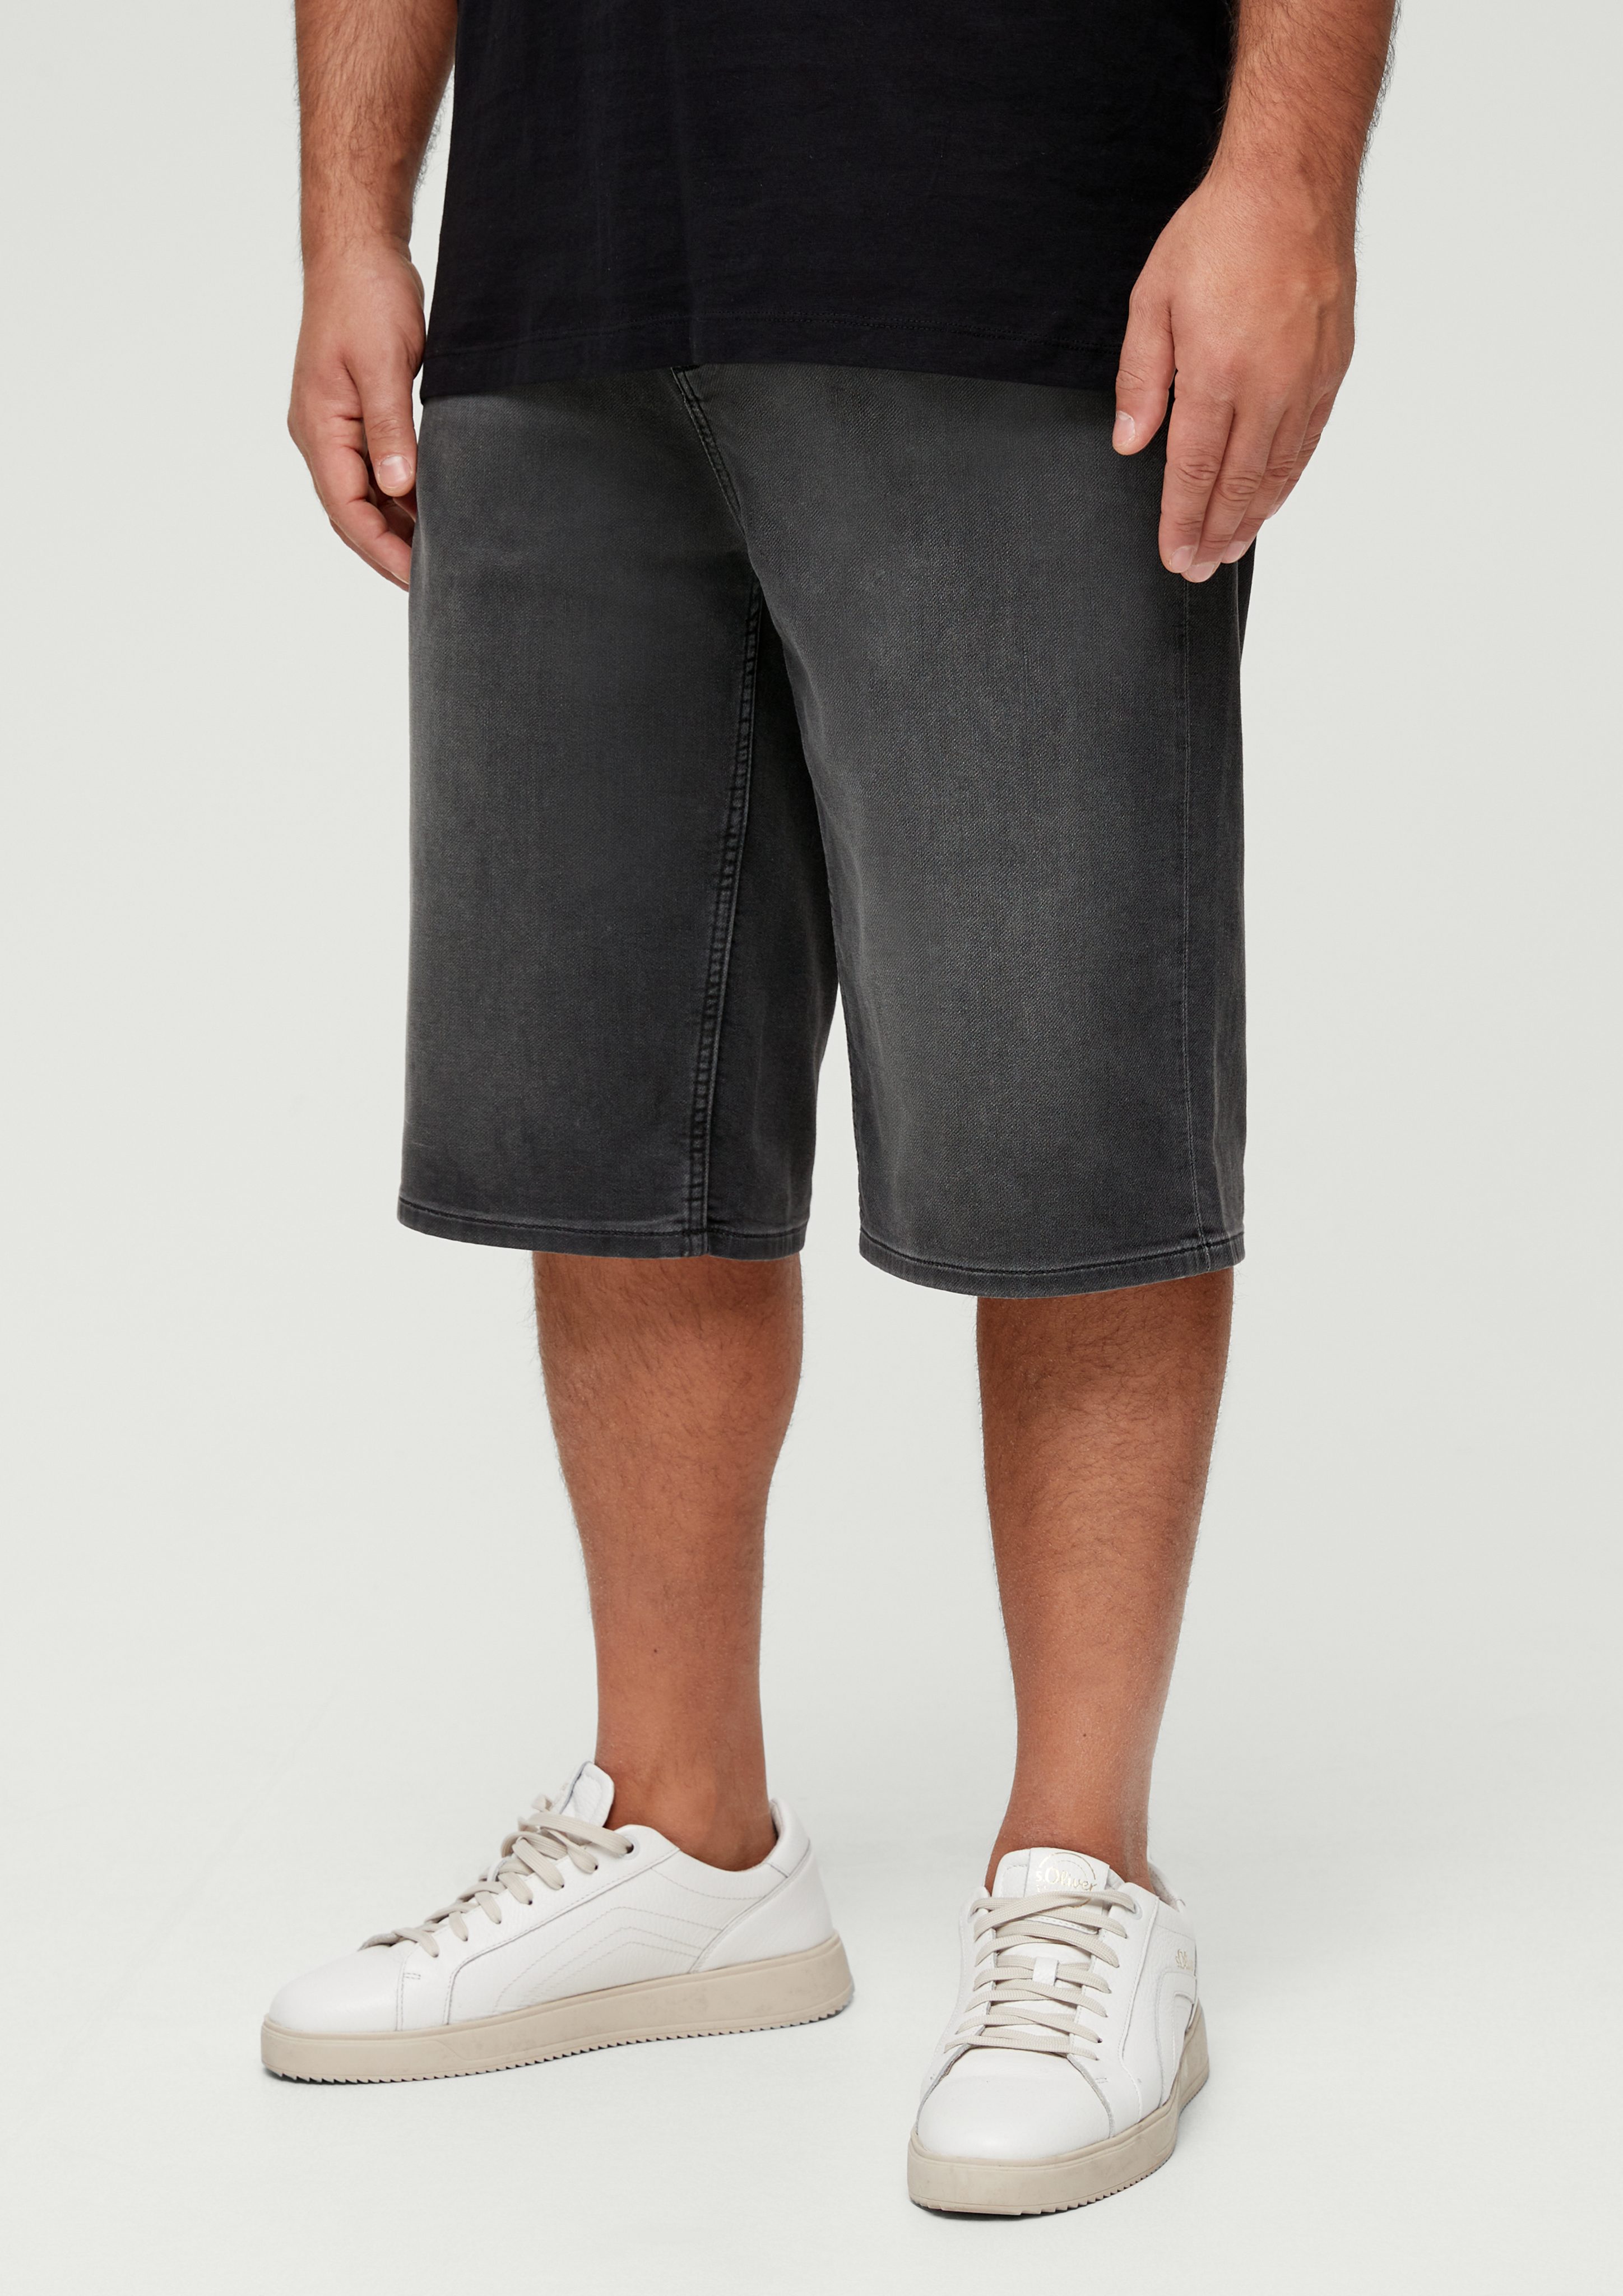 Jeansshorts Rise s.Oliver schiefergrau Straight Fit / / Leg Casby / Mid Relaxed Jeans-Shorts